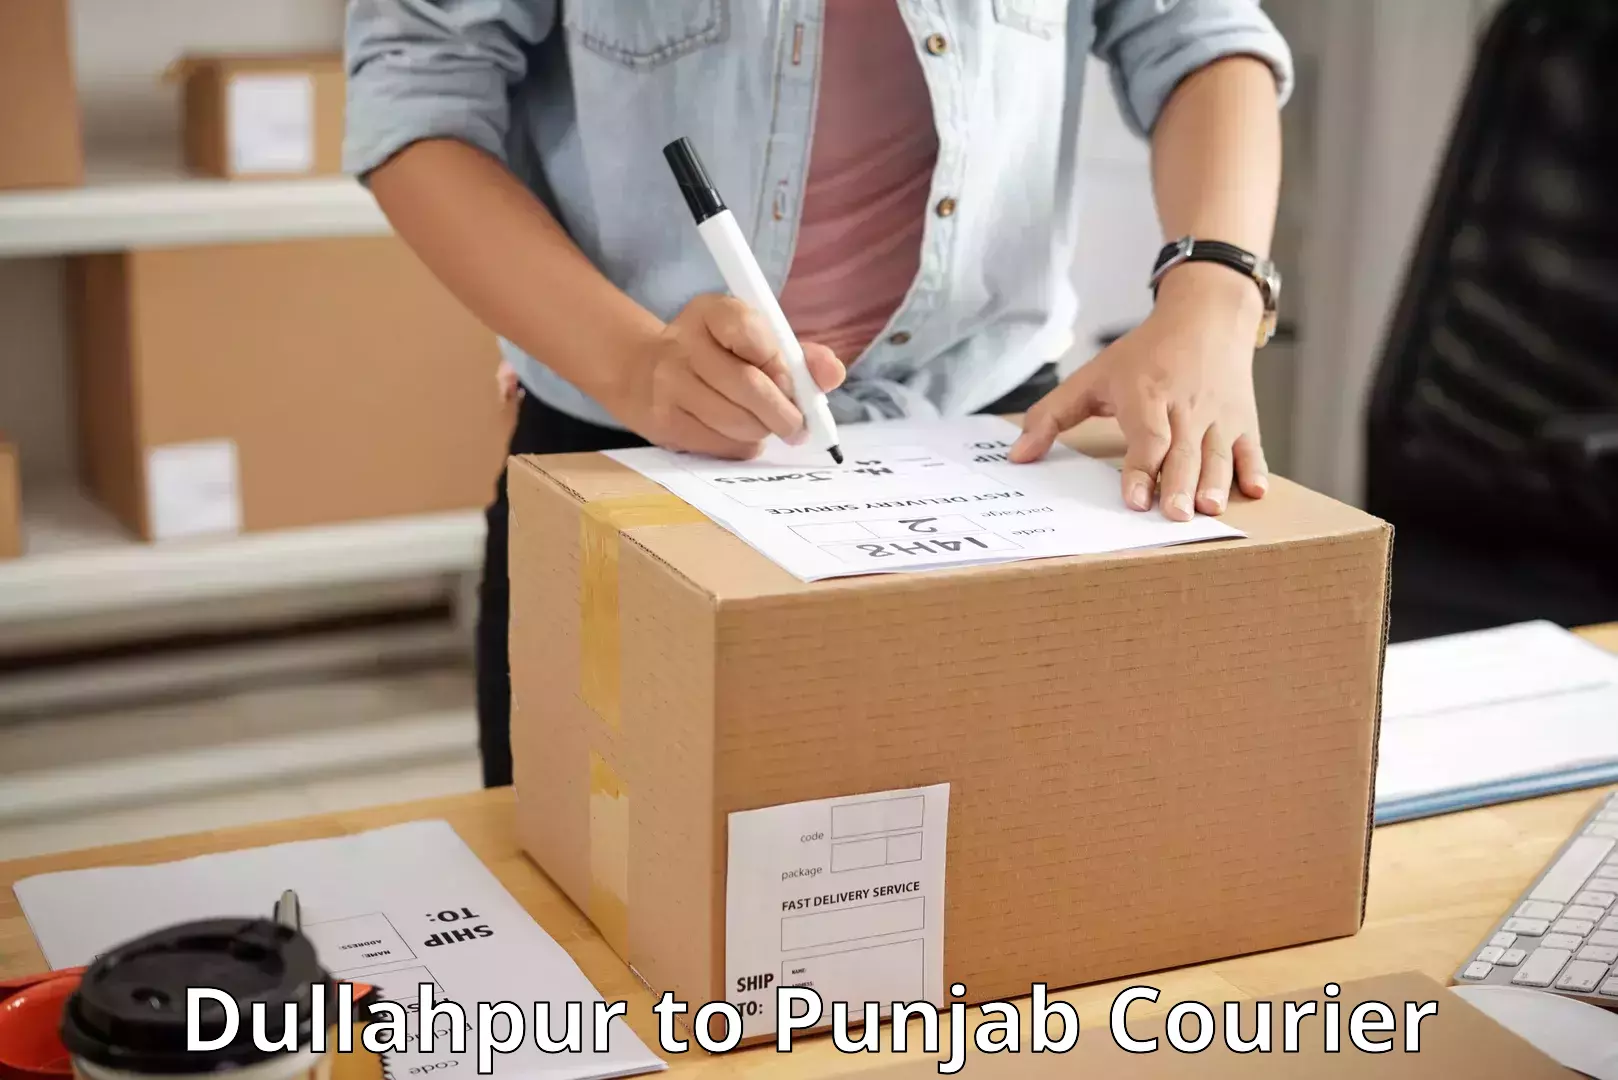 Courier service innovation Dullahpur to Malout